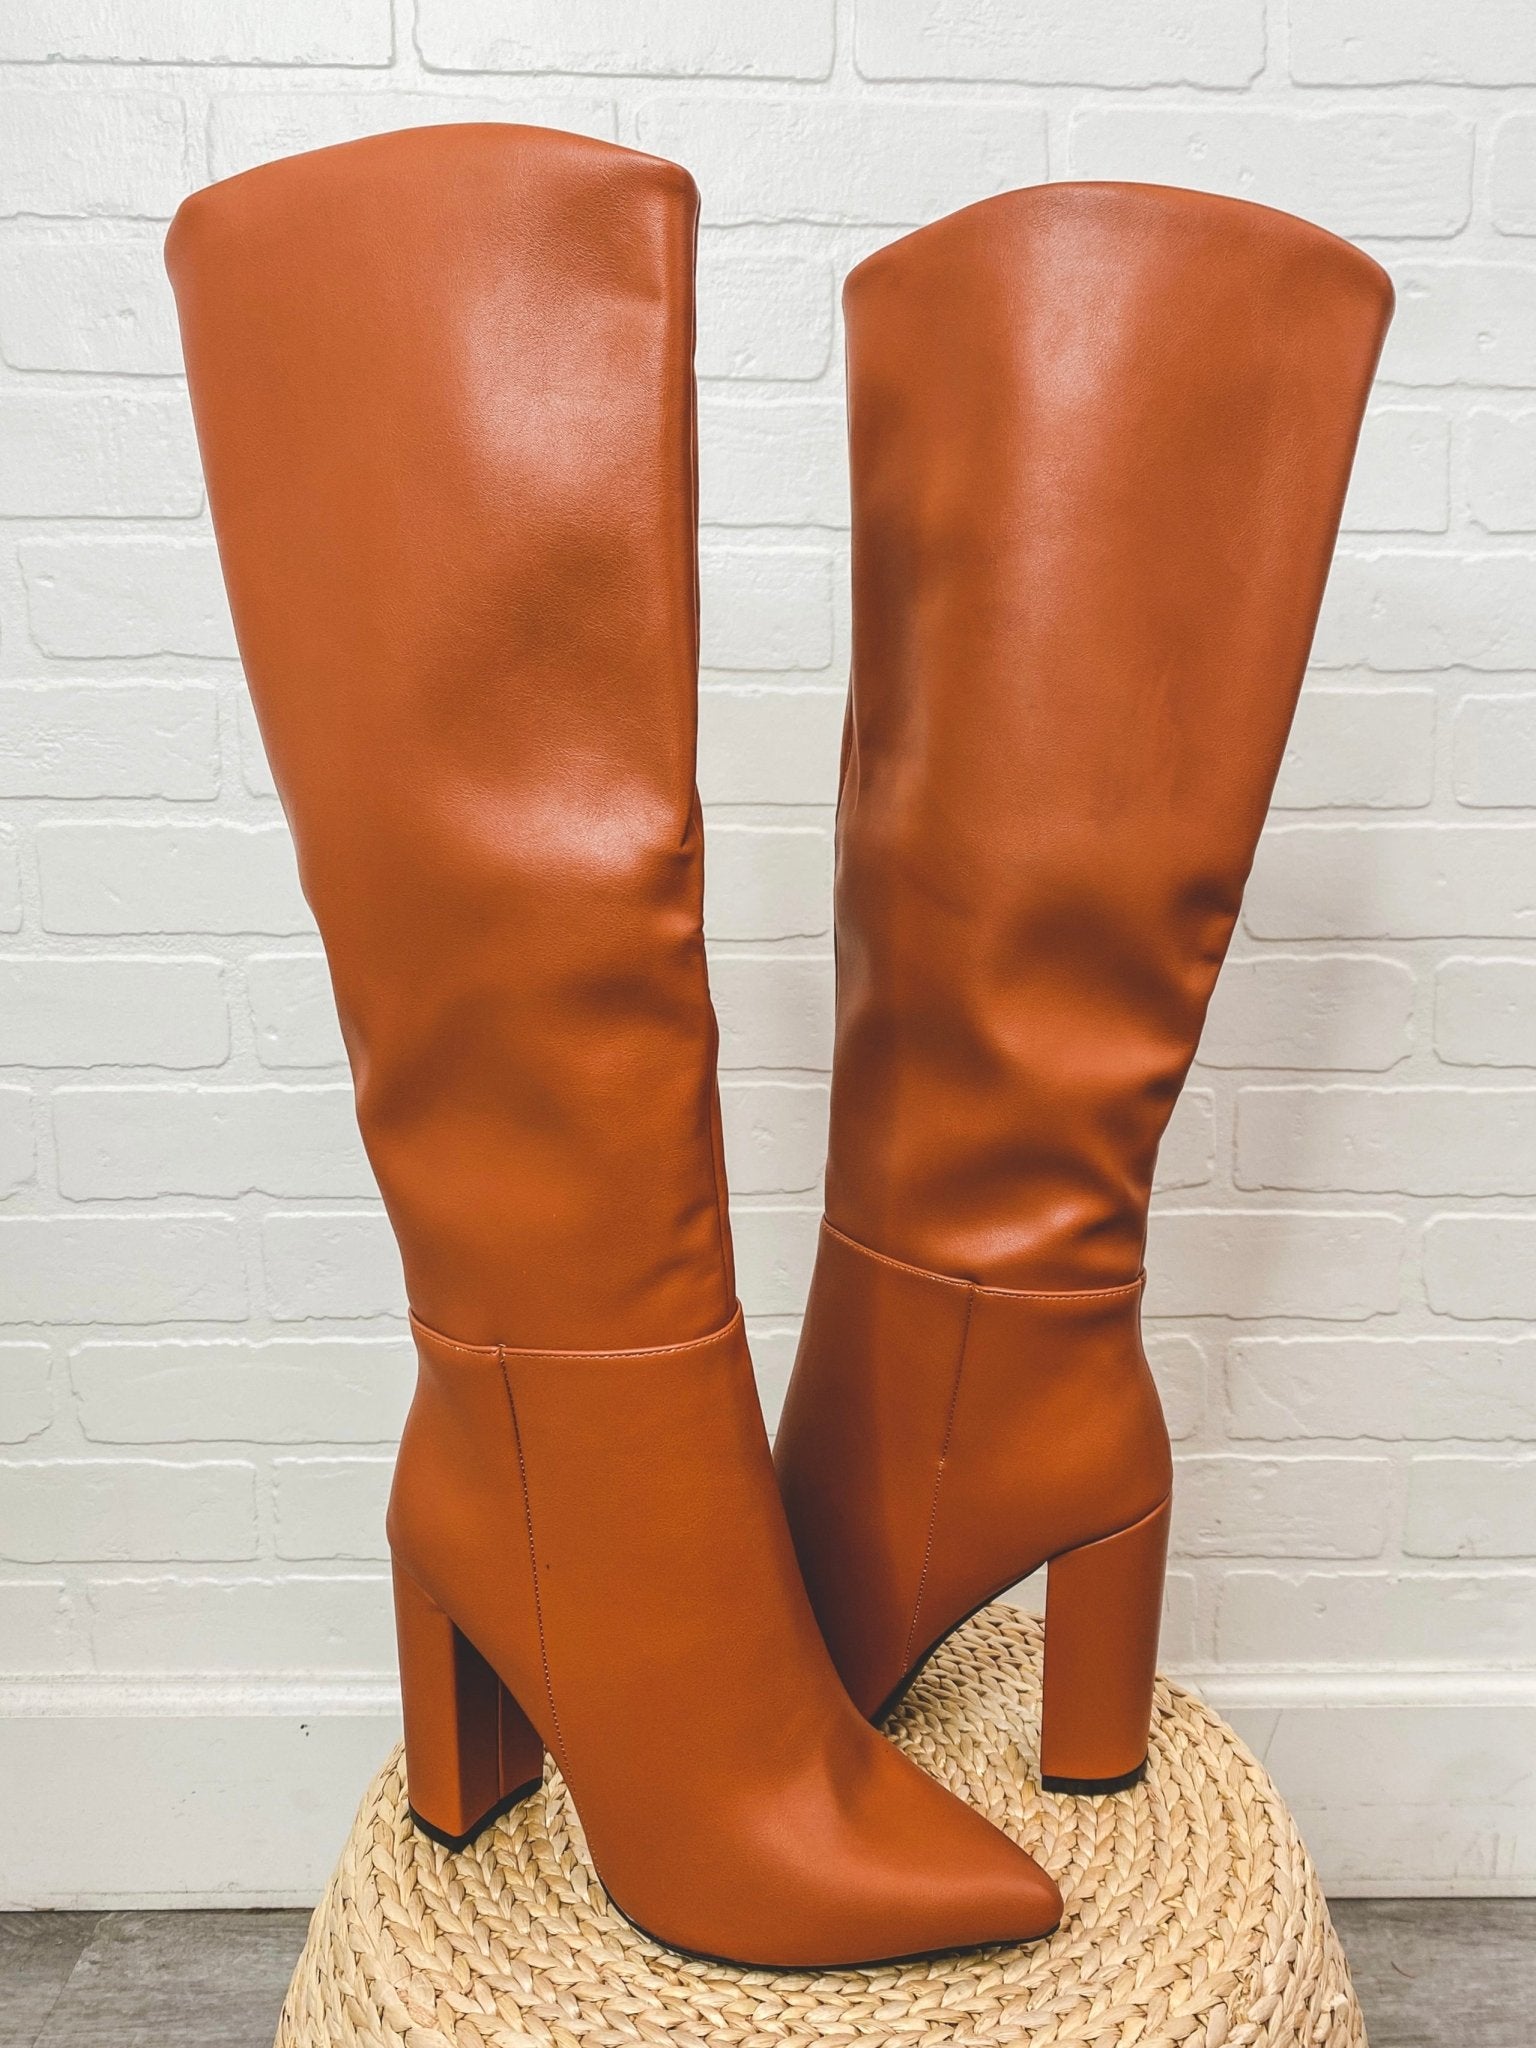 Signal knee high boots cognac - Cute boots - Trendy Shoes at Lush Fashion Lounge Boutique in Oklahoma City